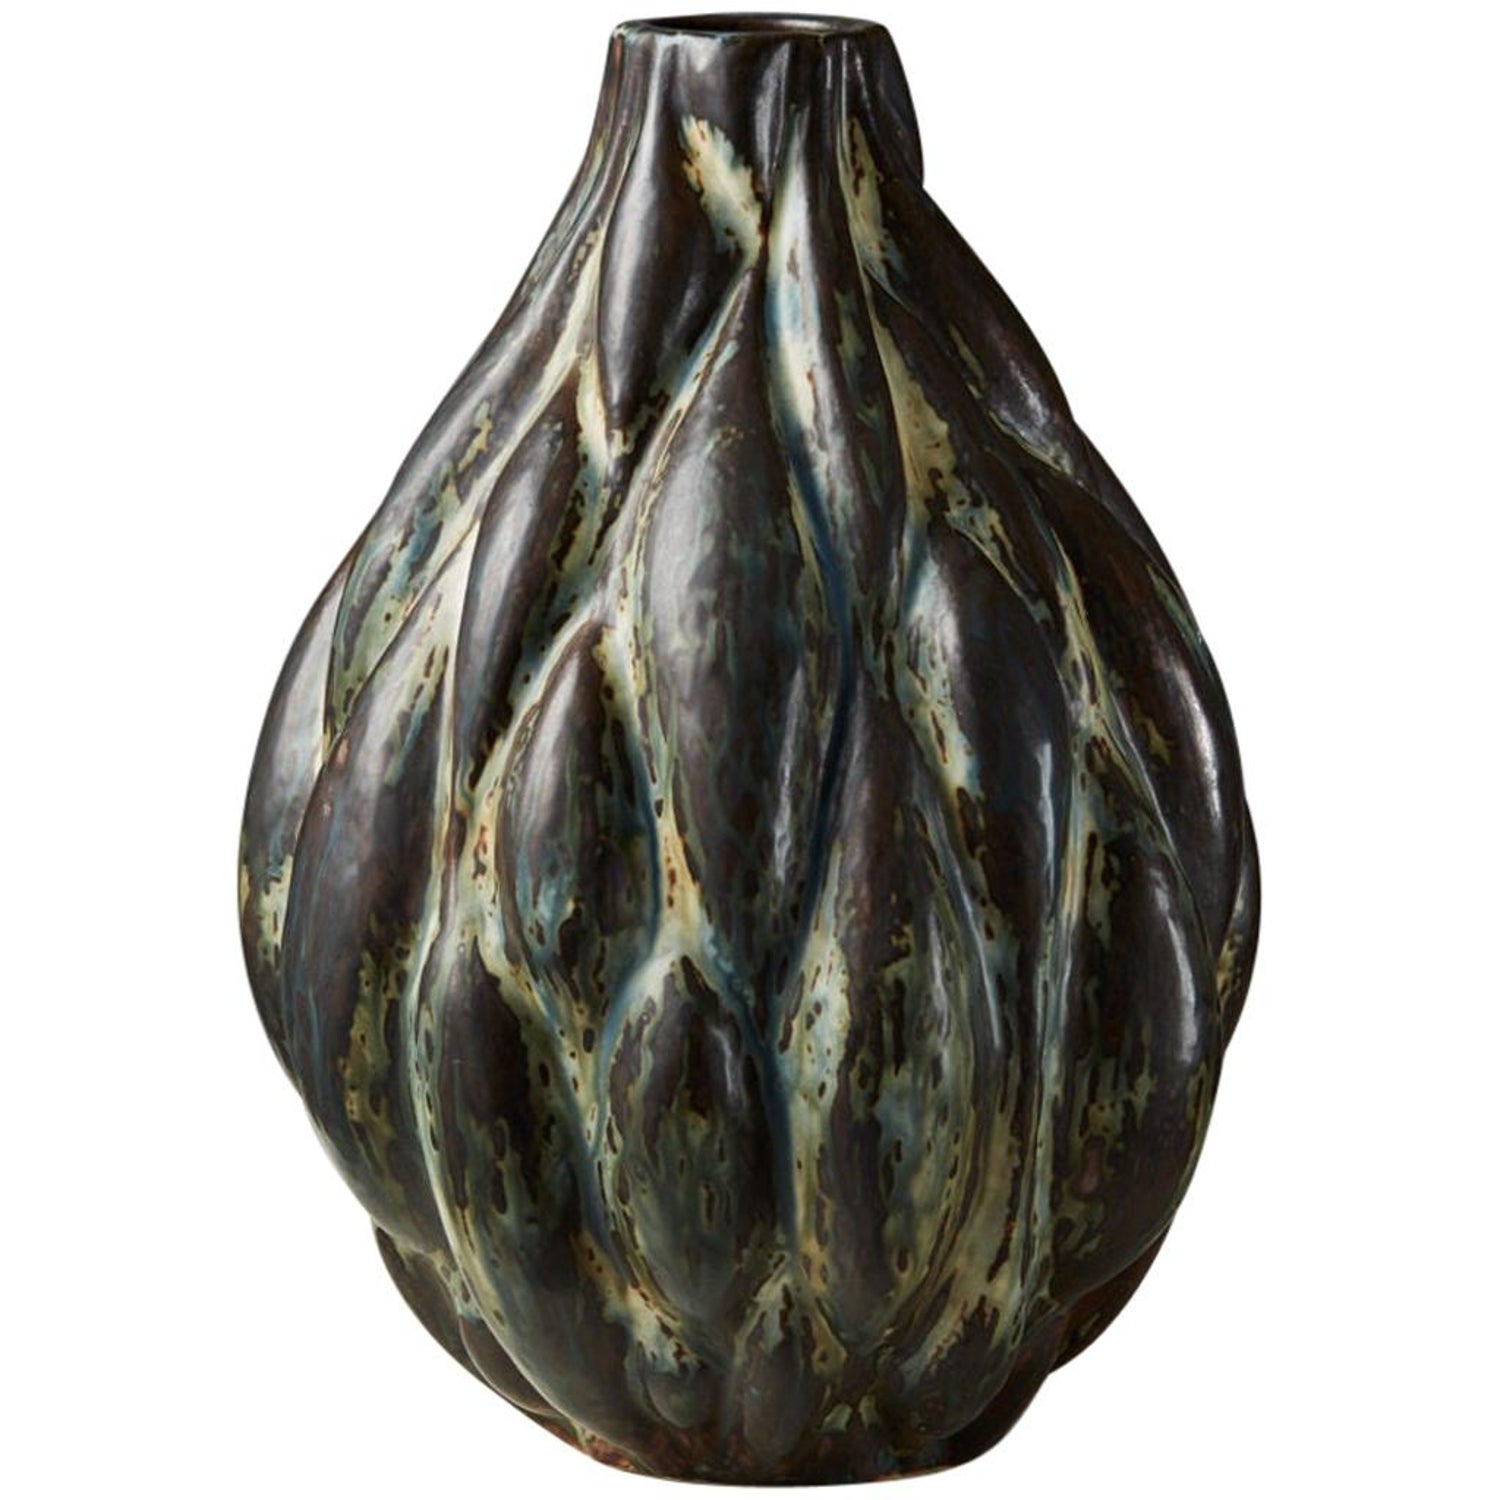 Axel Salto Vases - 11 For Sale at 1stDibs